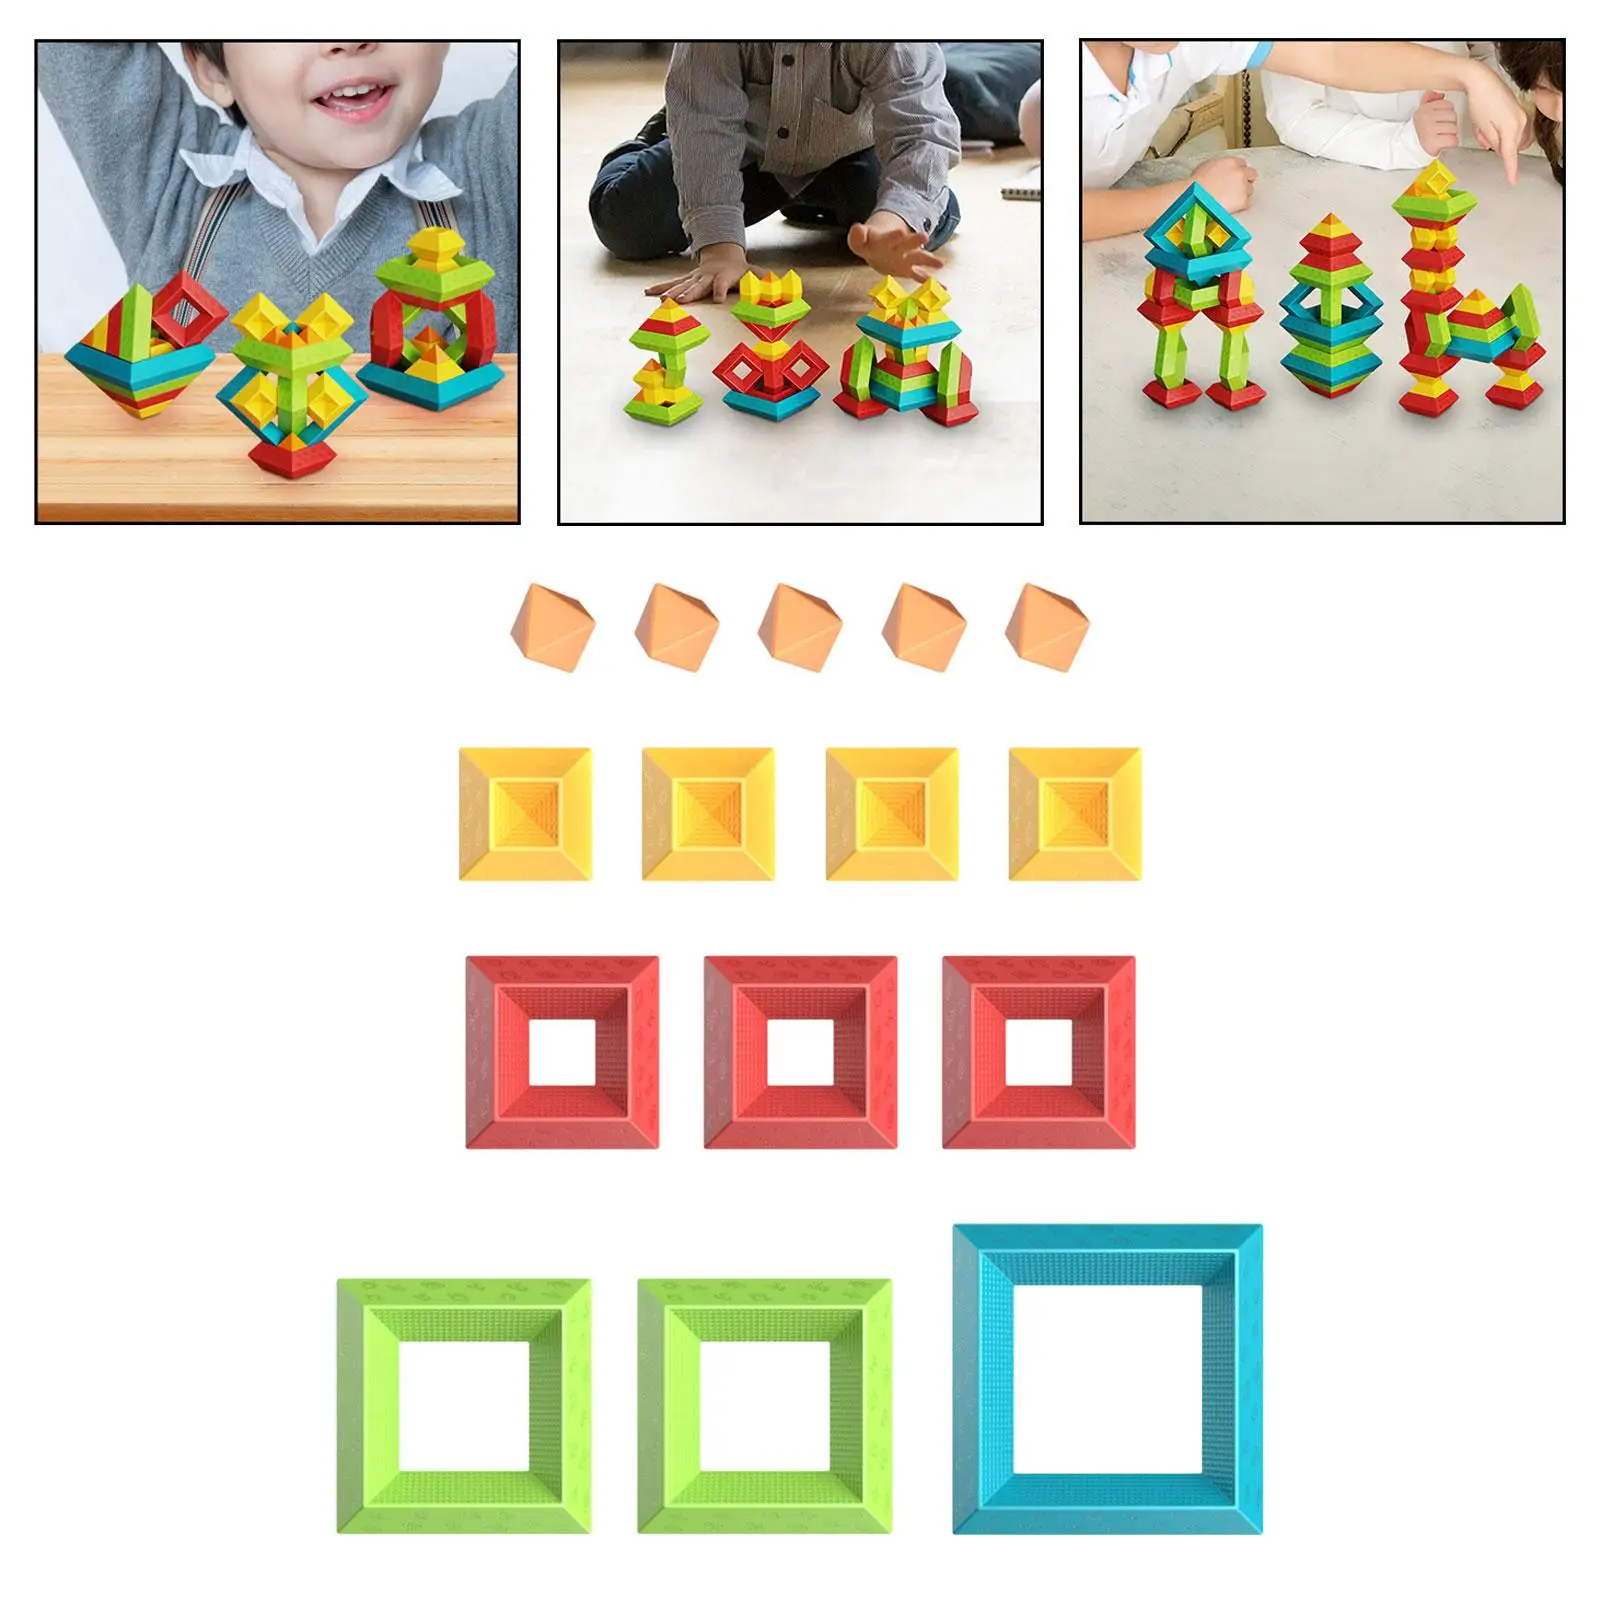 Pyramid Building Toys Creative Geometric Stacking Toy Montessori Toys for Toddlers Boys Girls Children Kids 1 2 3 4 5 Year Old